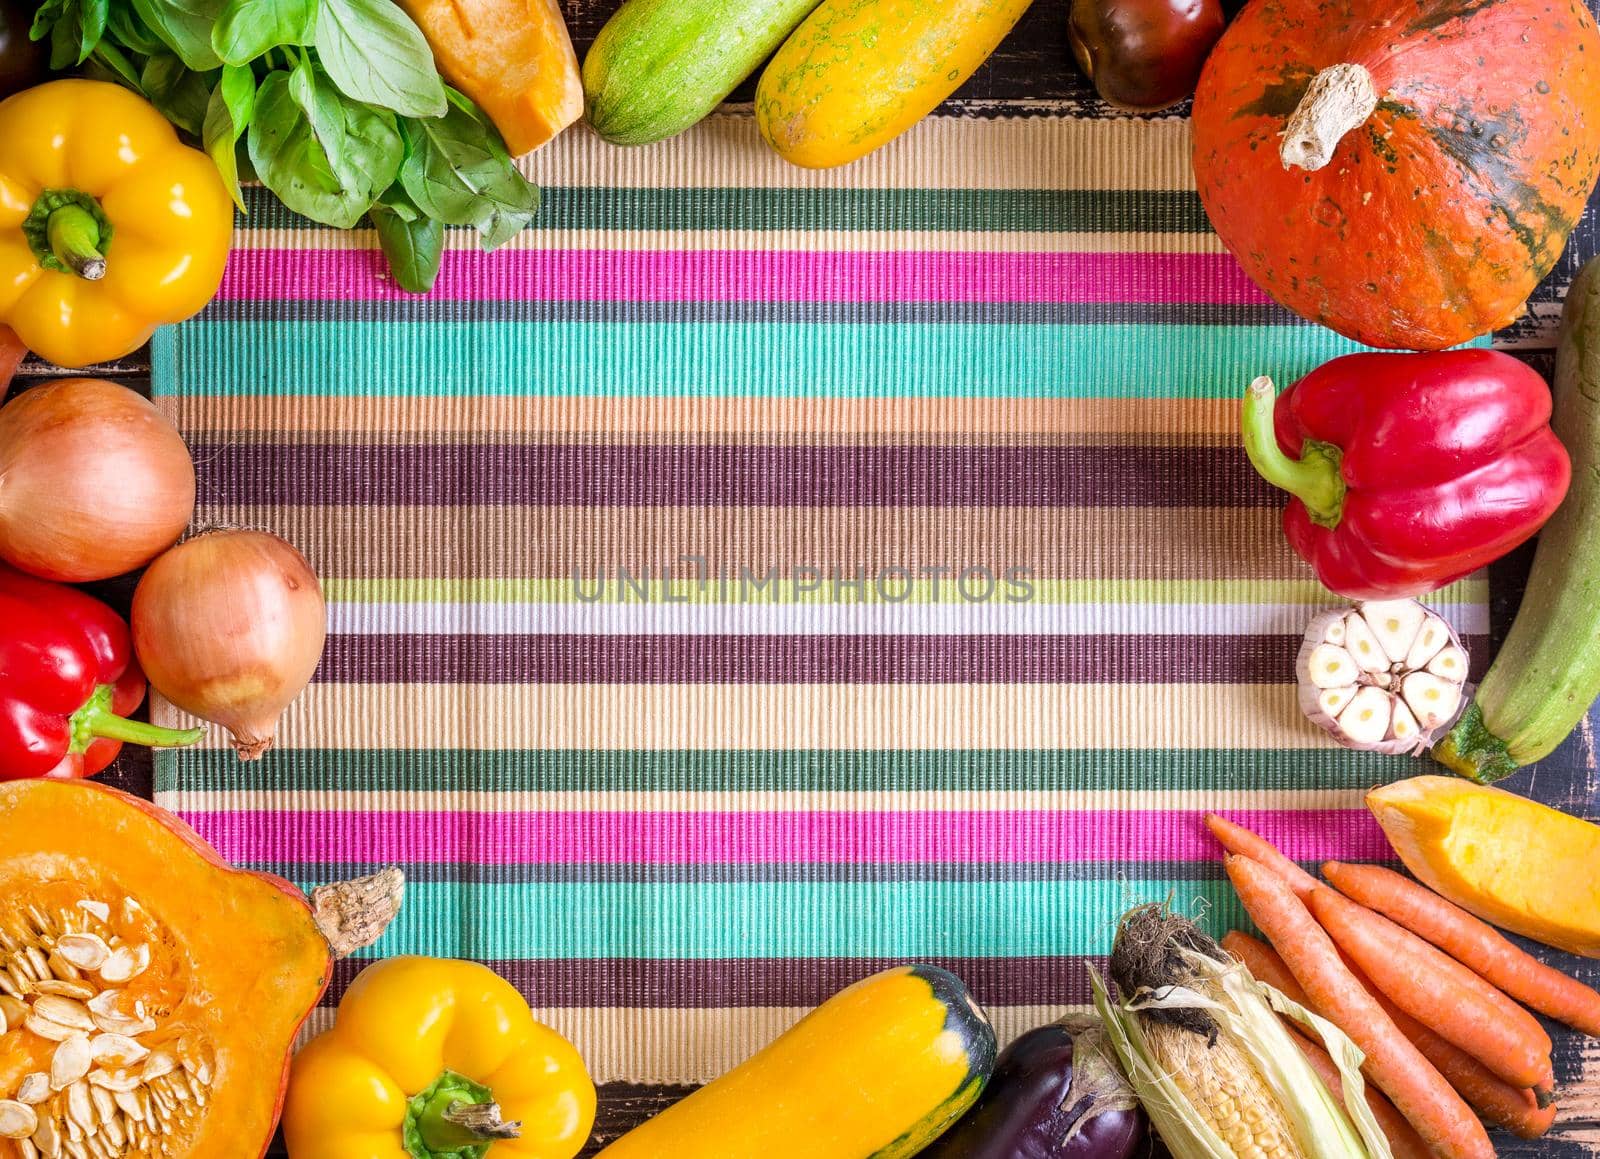 Fresh vegetables on a colorful striped kitchen towel. Autumn background by its_al_dente